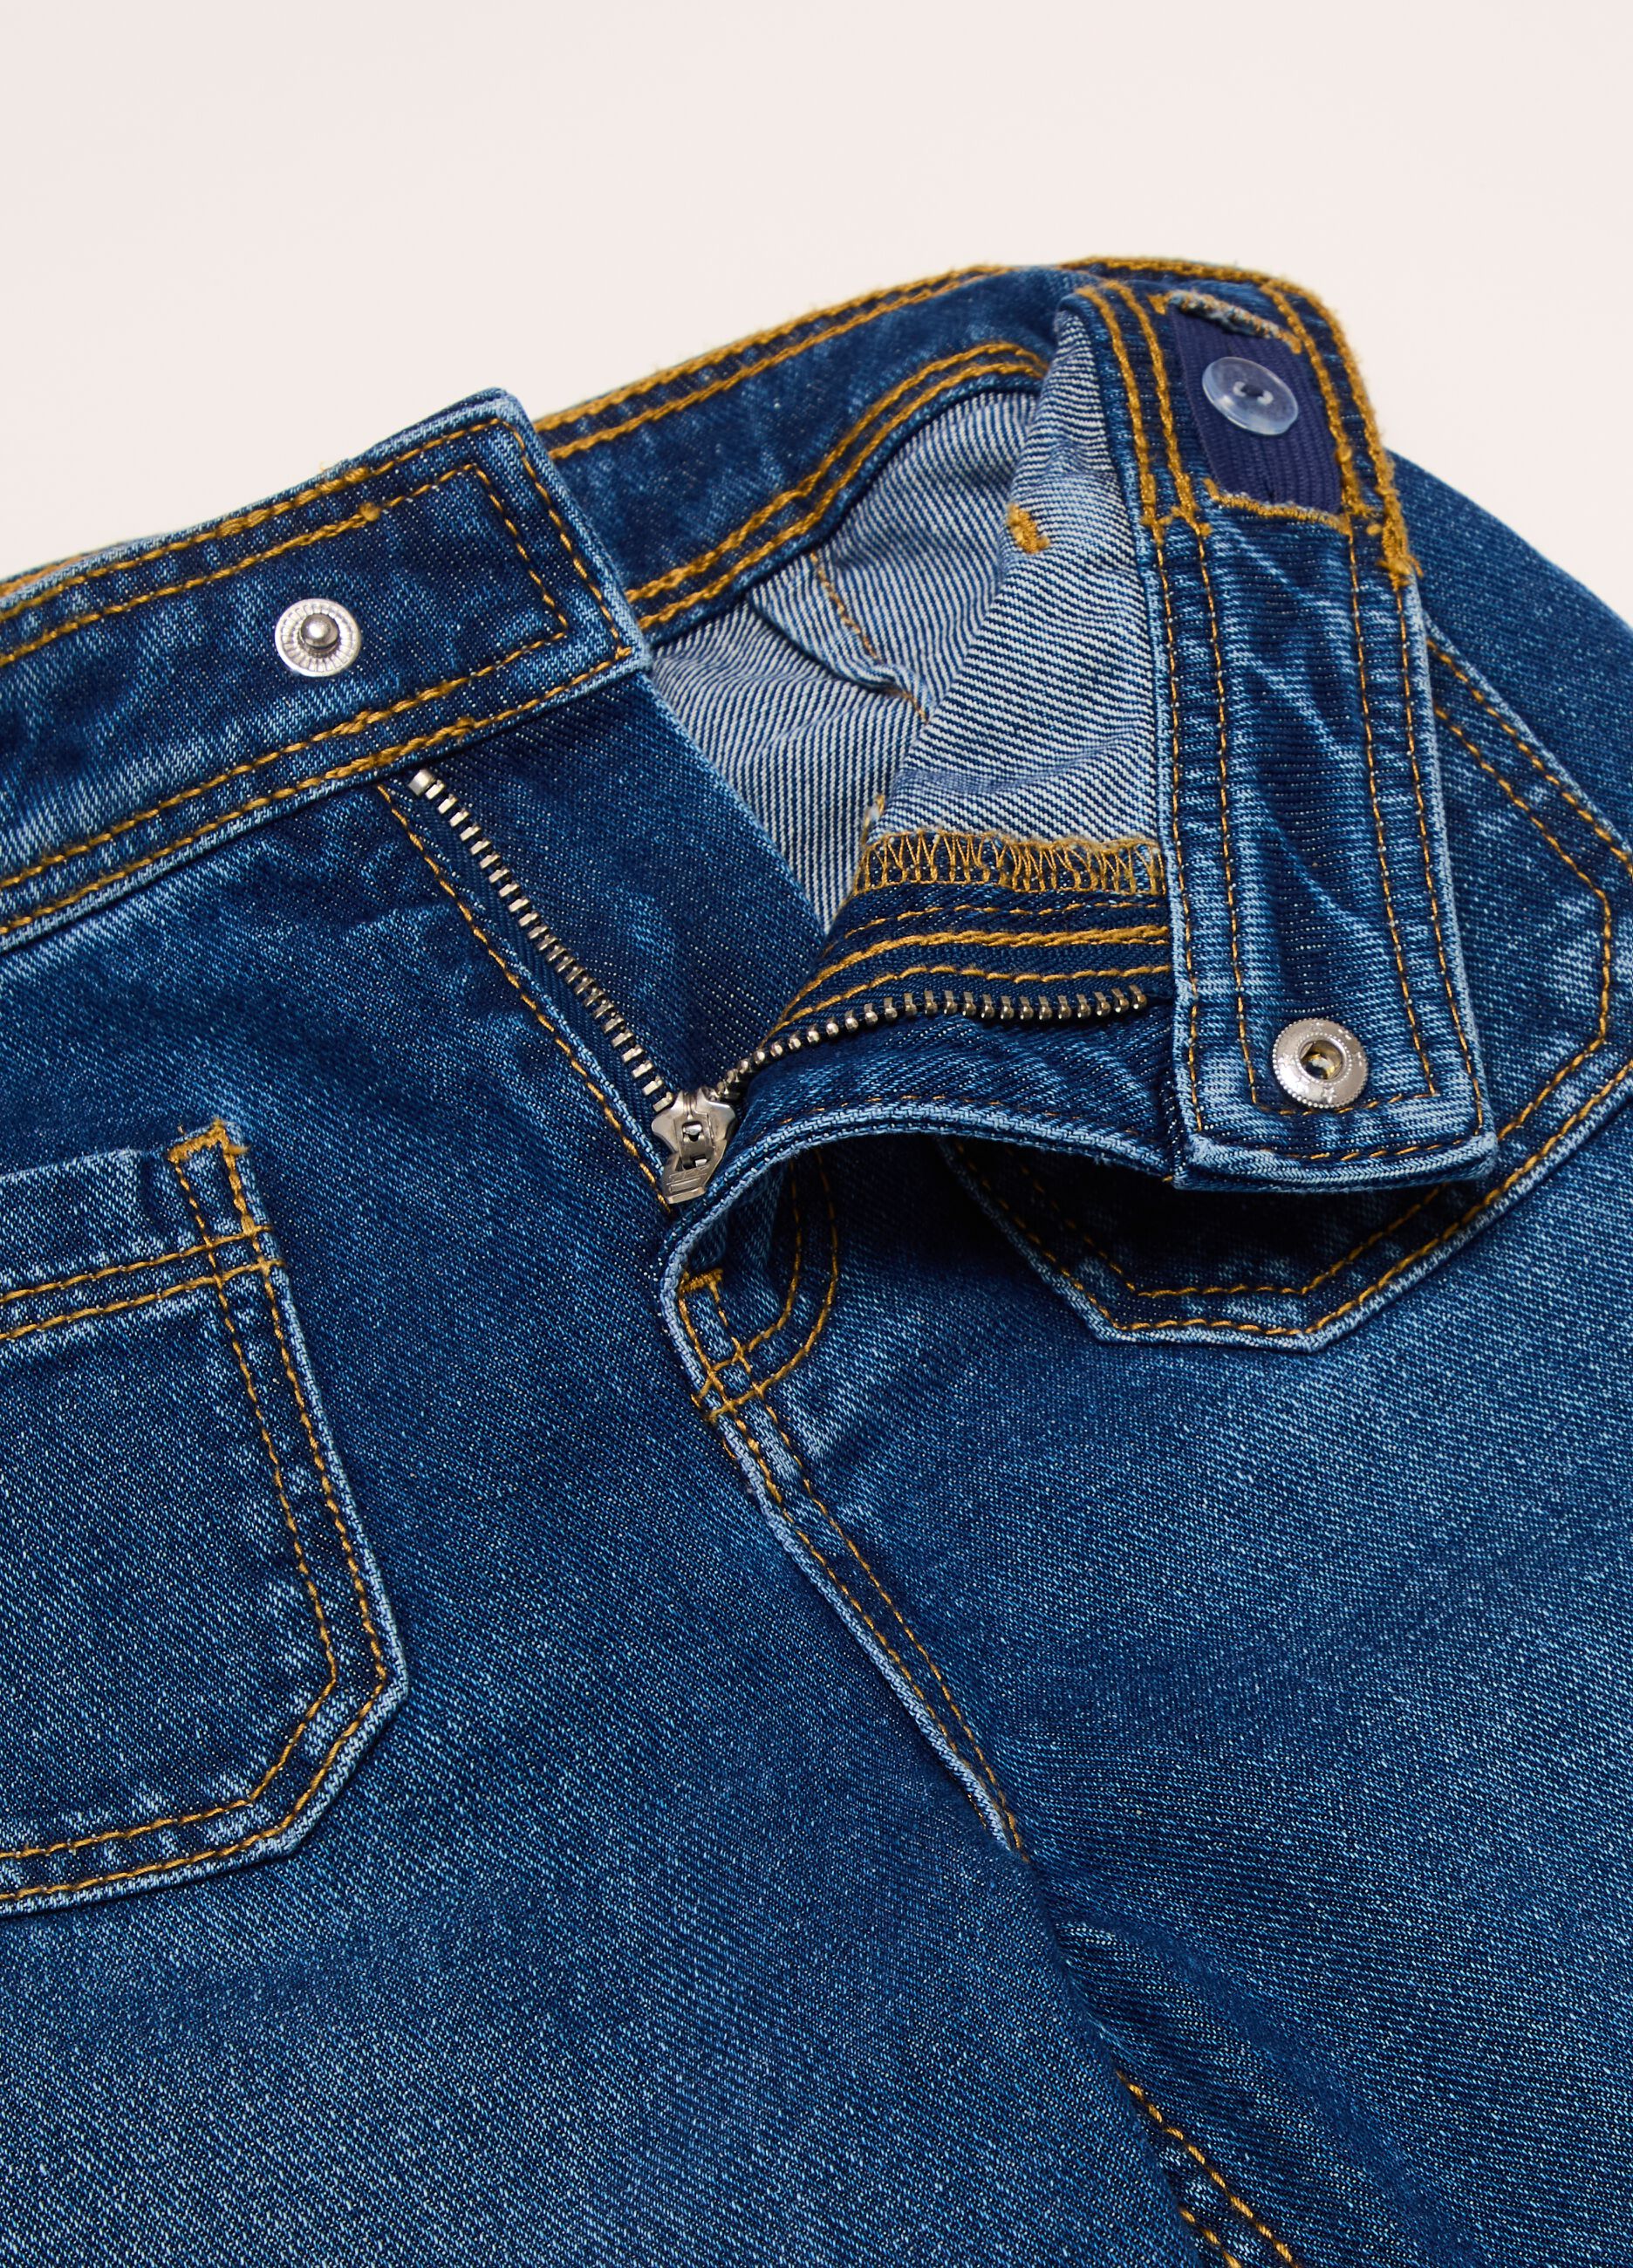 Marine-fit jeans with pockets